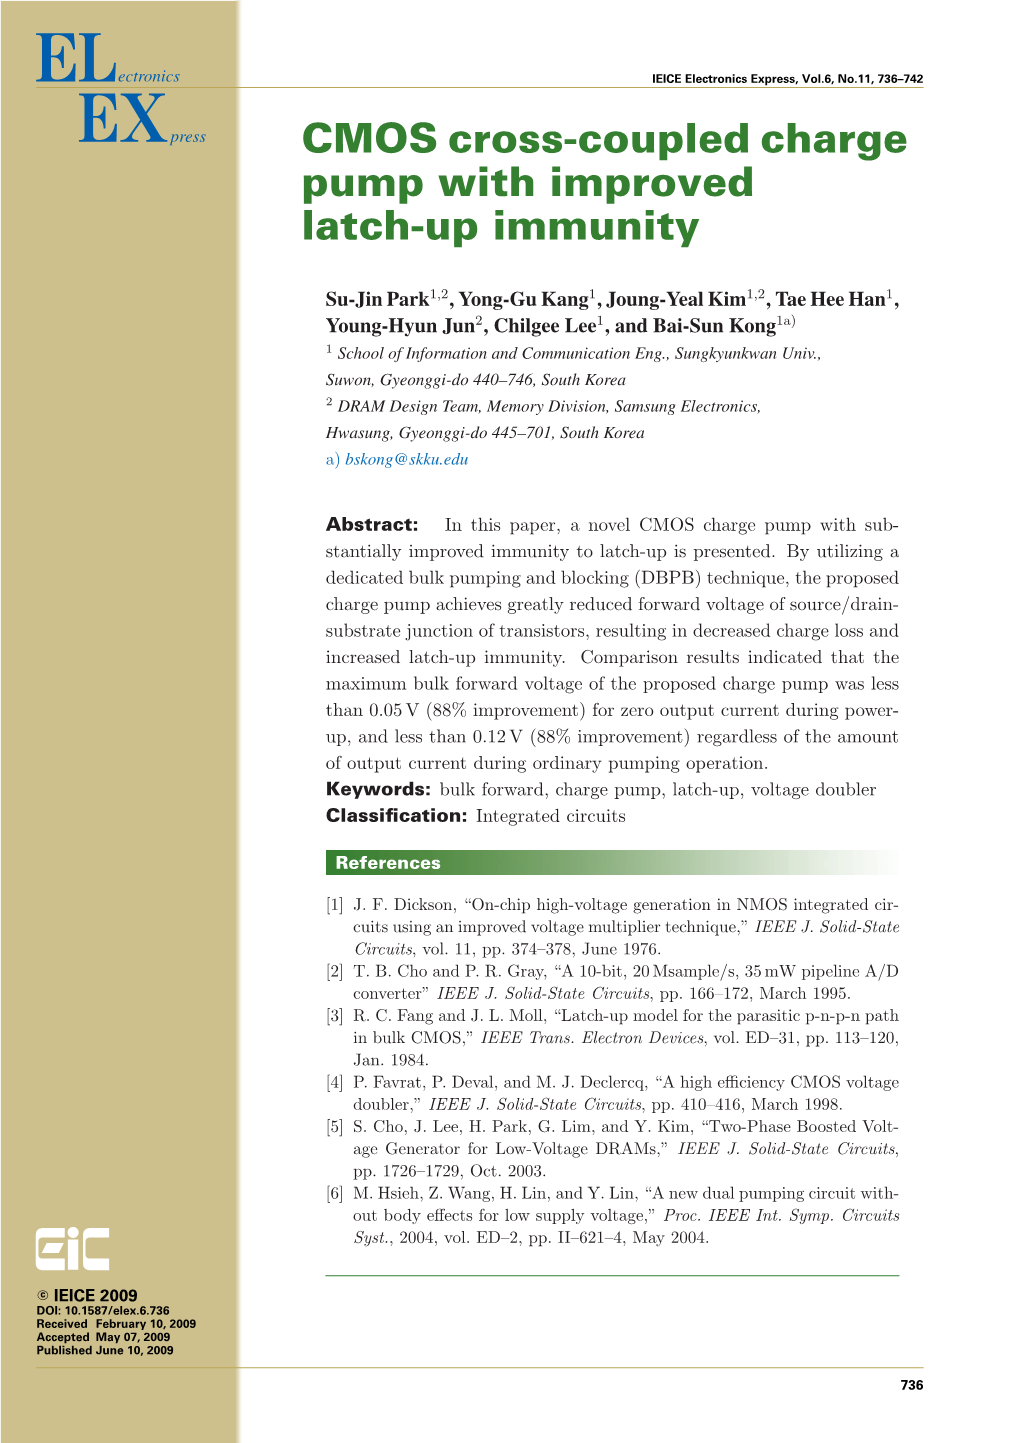 CMOS Cross-Coupled Charge Pump with Improved Latch-Up Immunity